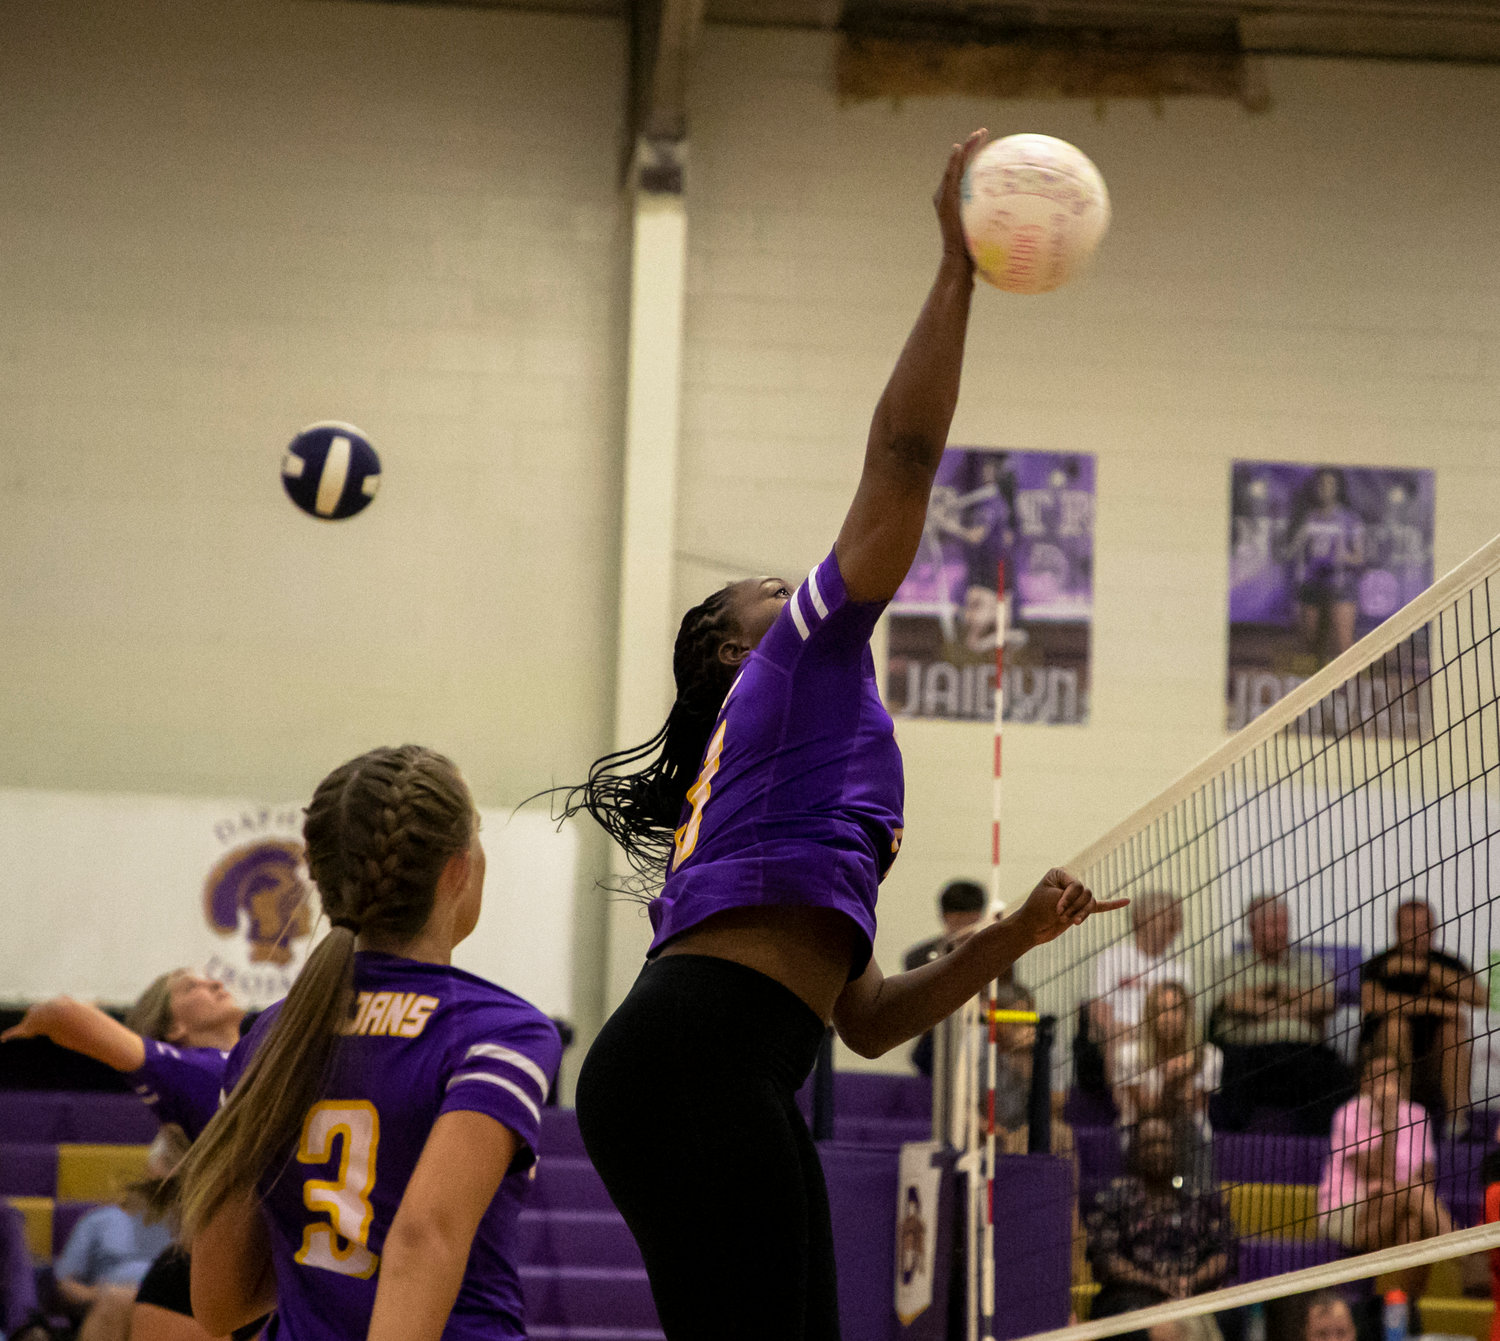 Trojan senior Janiyah King goes through warmups ahead of the Class 7A Area 2 match against the McGill-Toolen Yellow Jackets at Daphne High School Sept. 20. King closed her high school career as one of three Trojan representatives named all-state by the Alabama High School Volleyball Coaches Association.